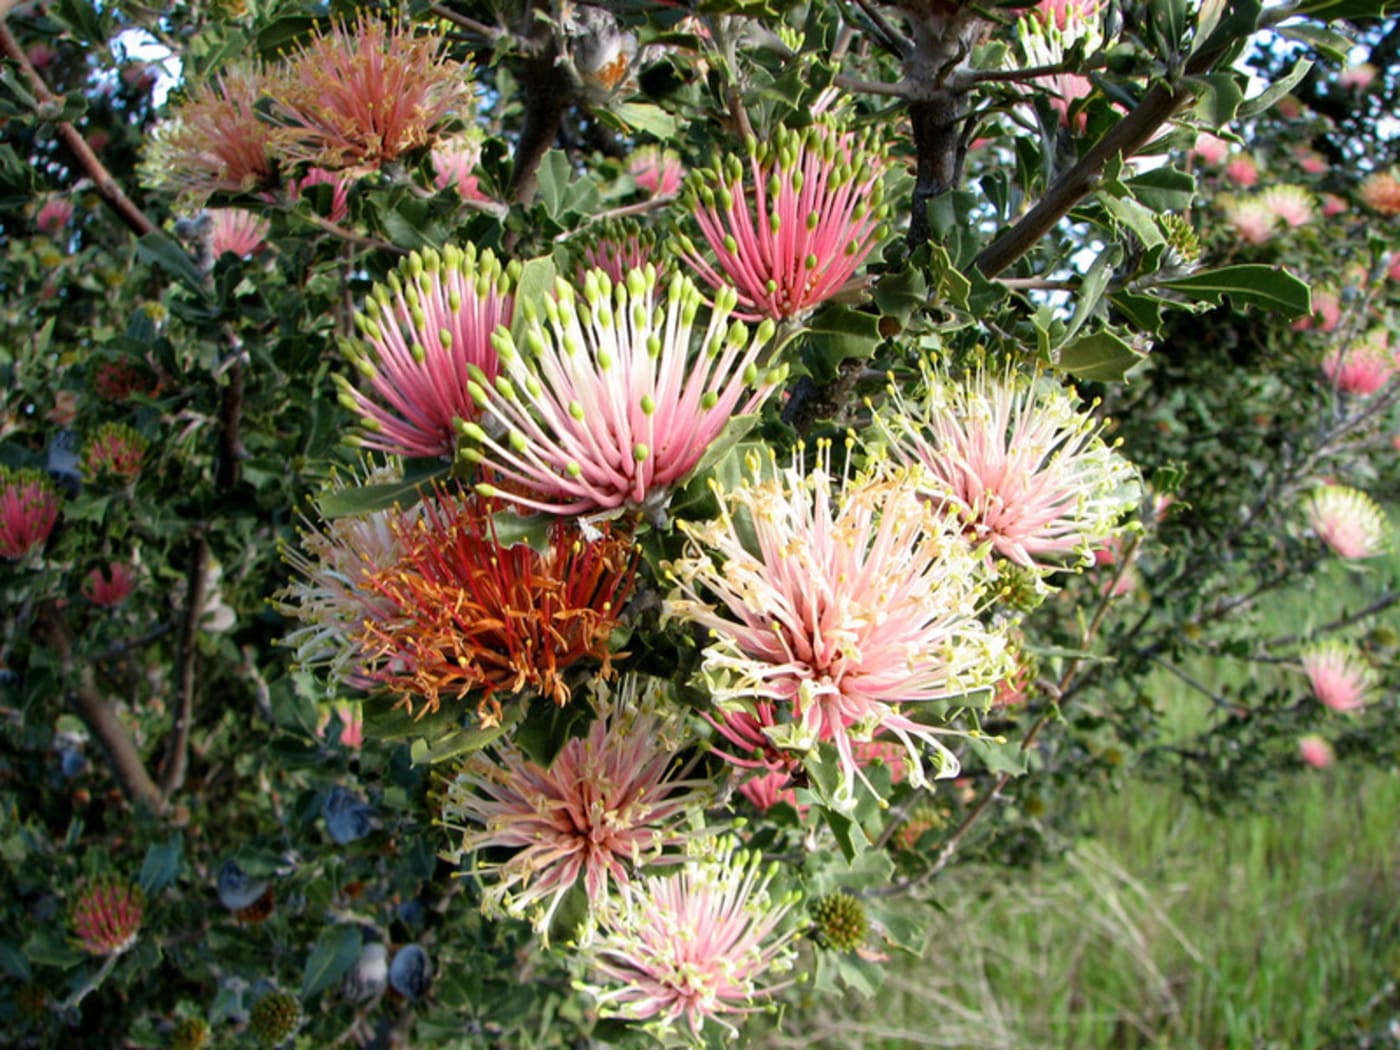 A Banksia cuneata bush with spiky green and white flowers with green tips in Western Australia.